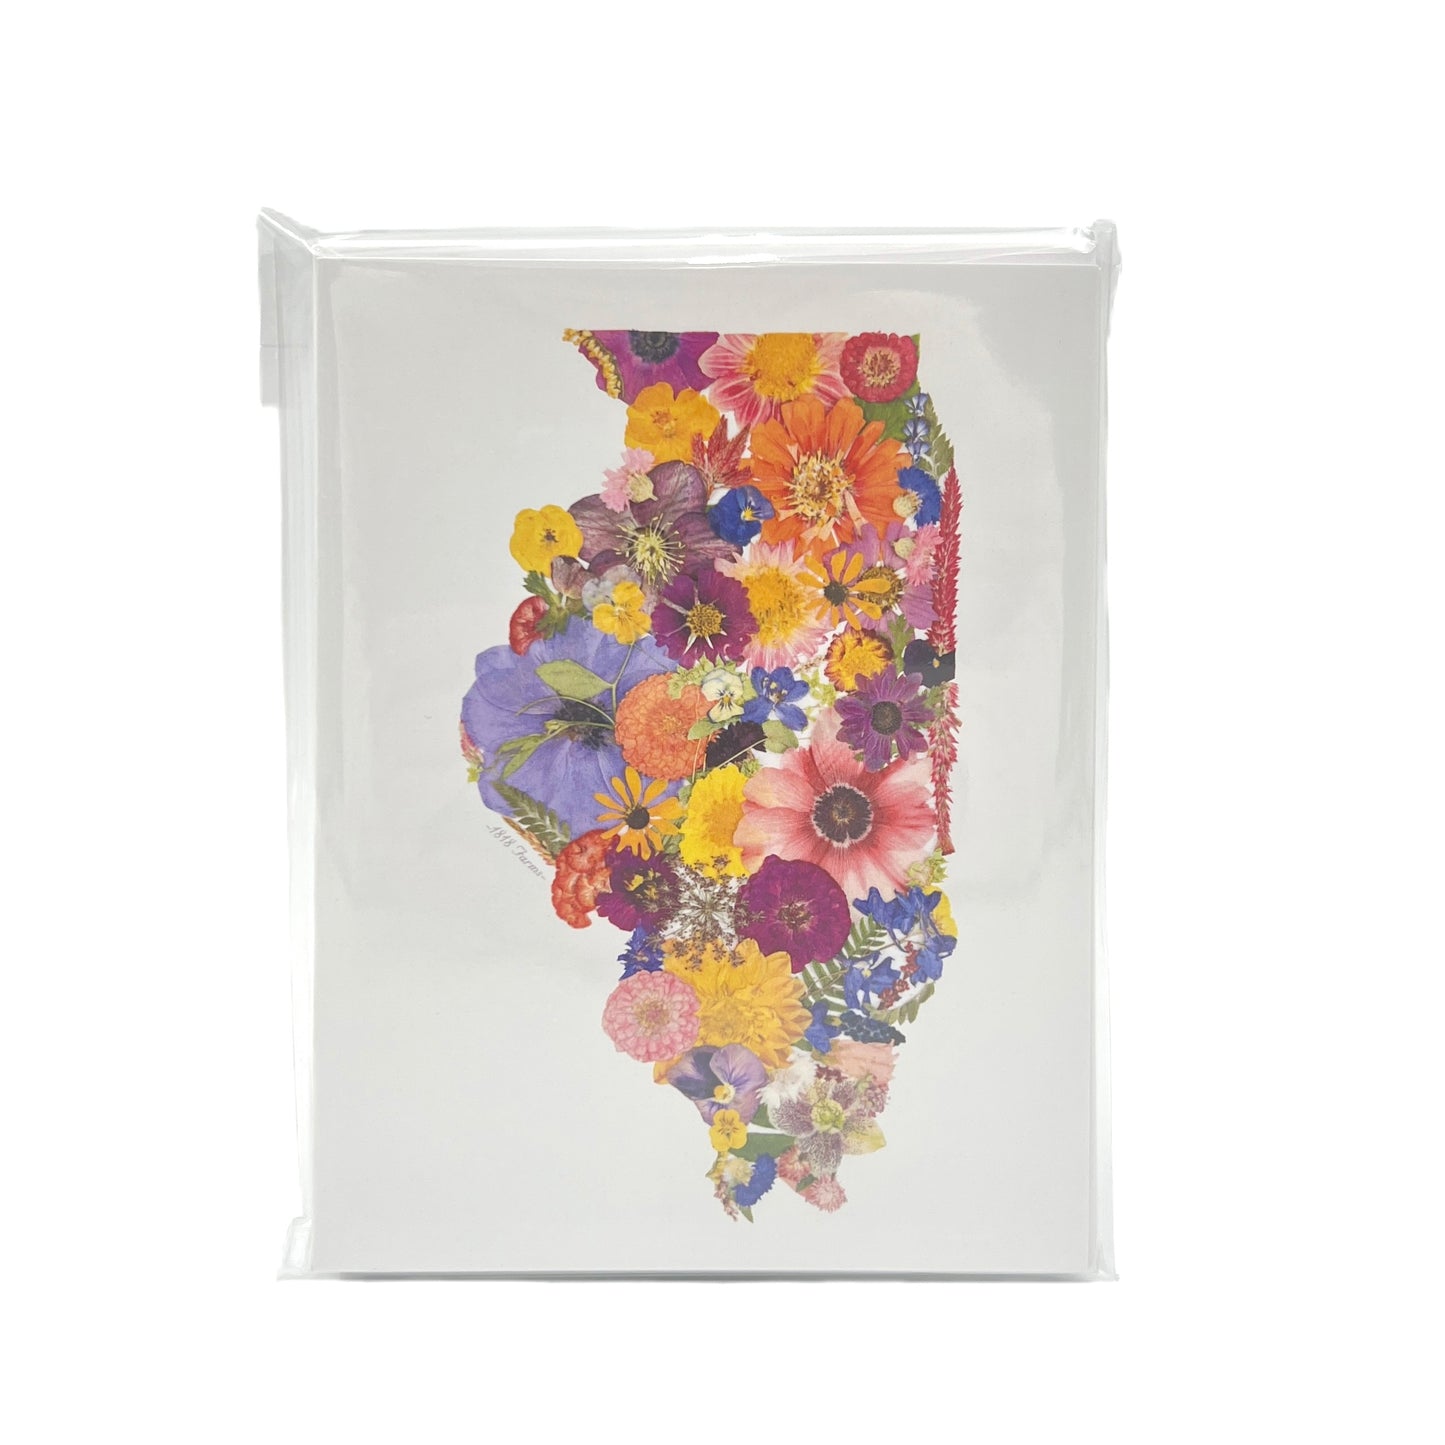 Illinois Themed Notecards (Set of 6)  - "Where I Bloom" Collection Notecard 1818 Farms   